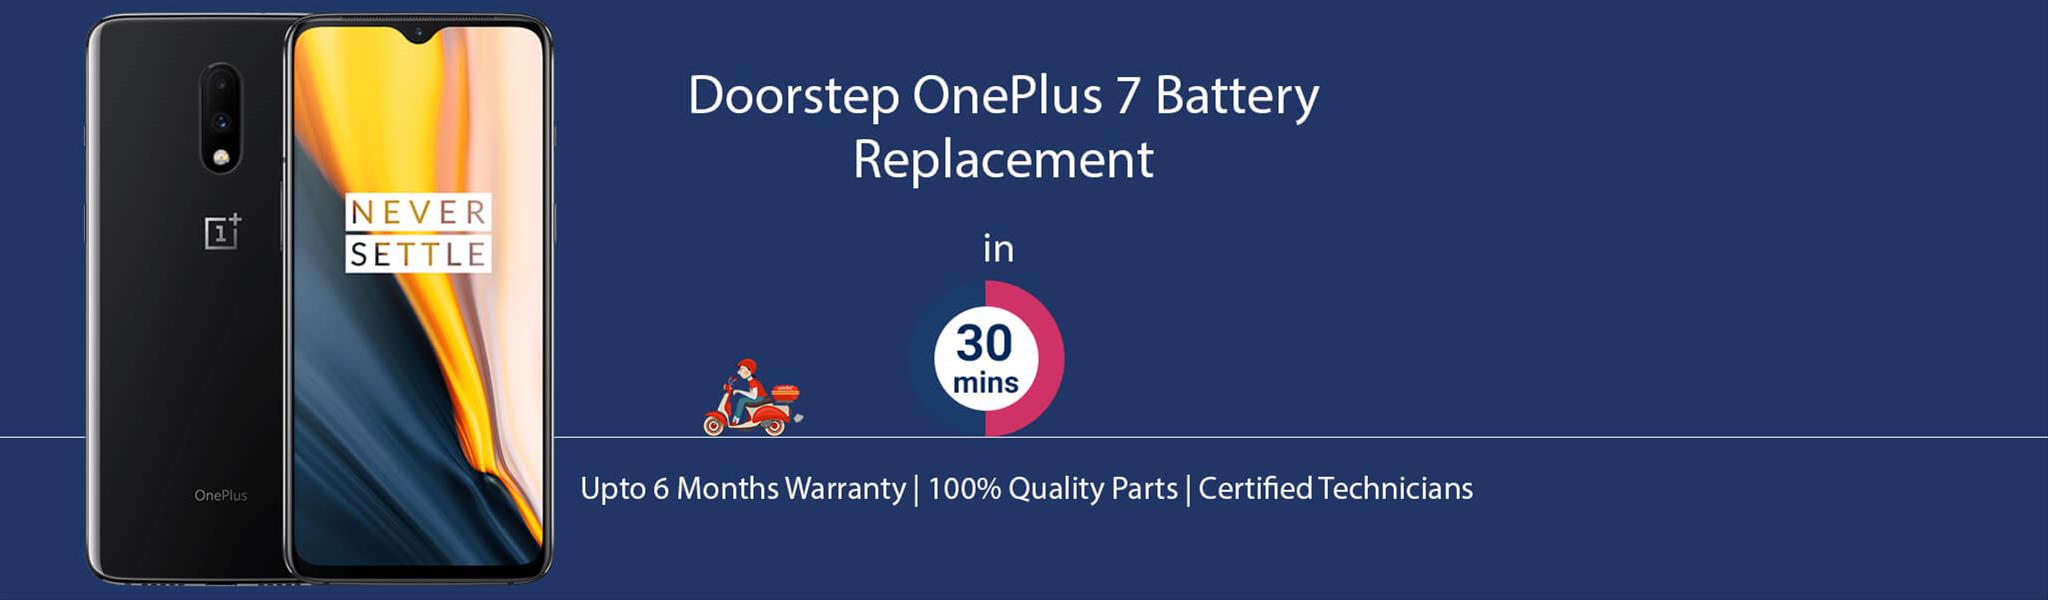 oneplus-7-battery-replacement.jpg